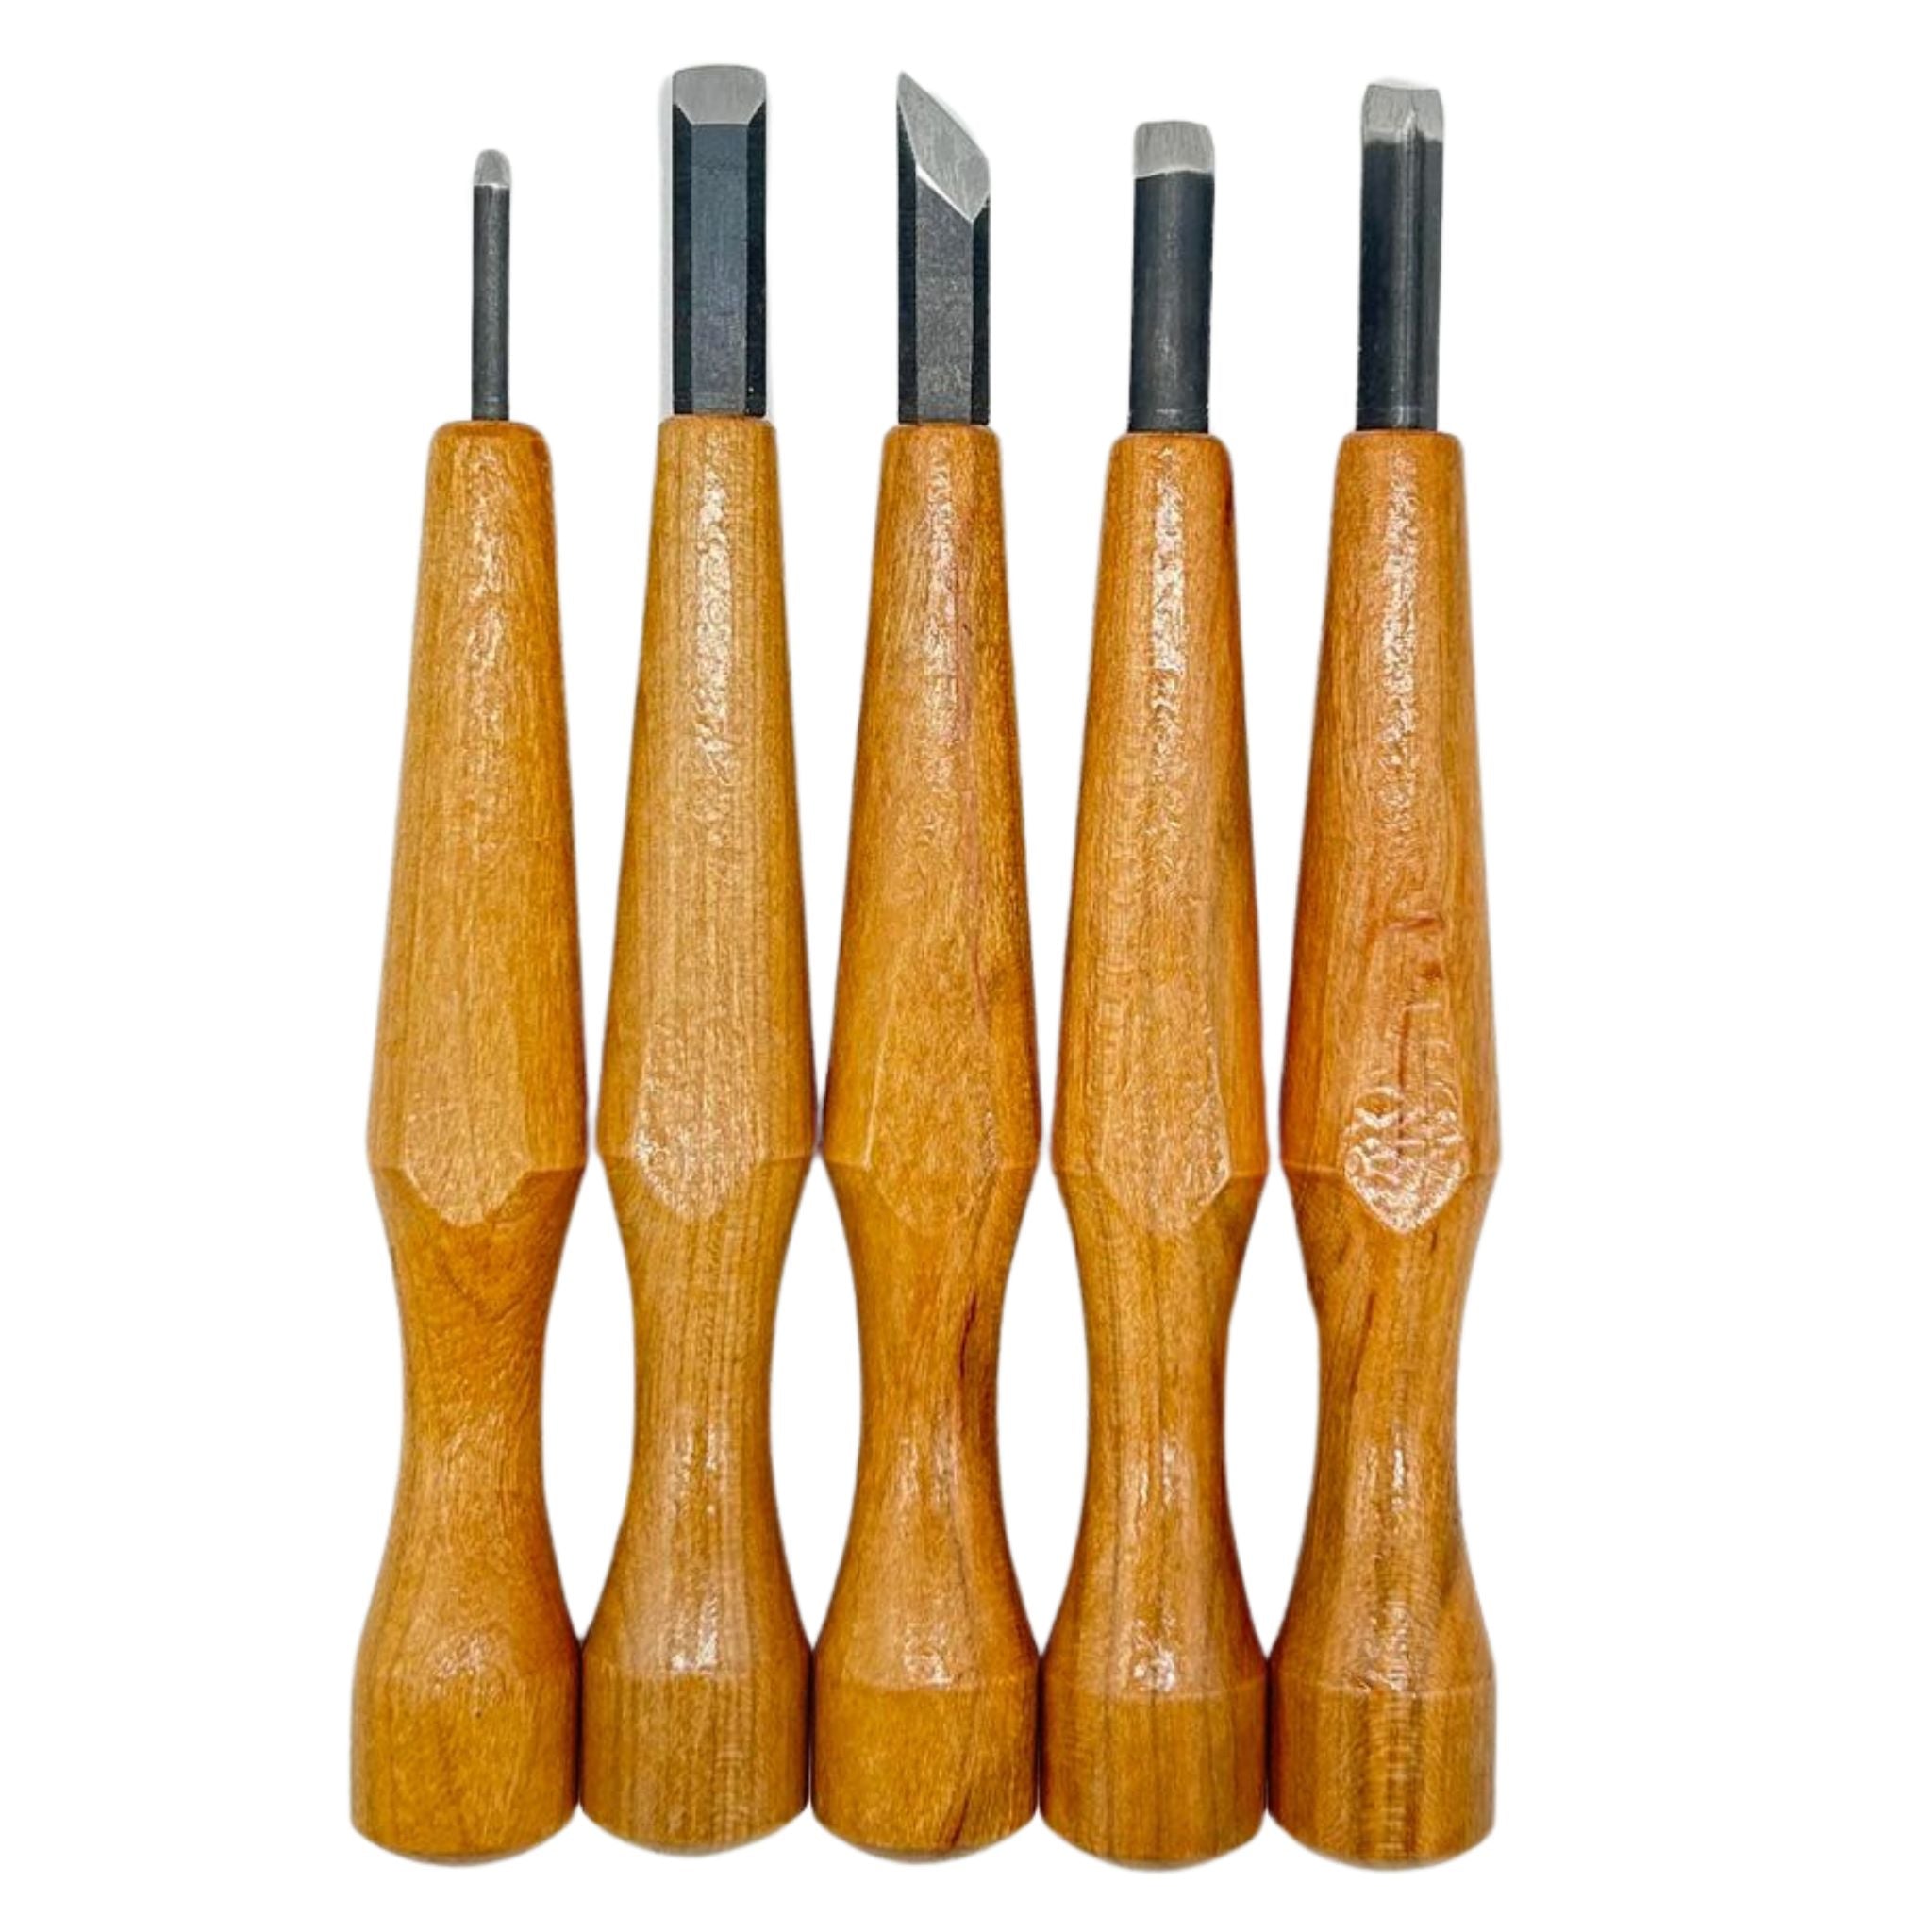 Mikisyo POWER GRIP Wood Carving Chisels & Gouges, 5 pieces Set, Made in Japan